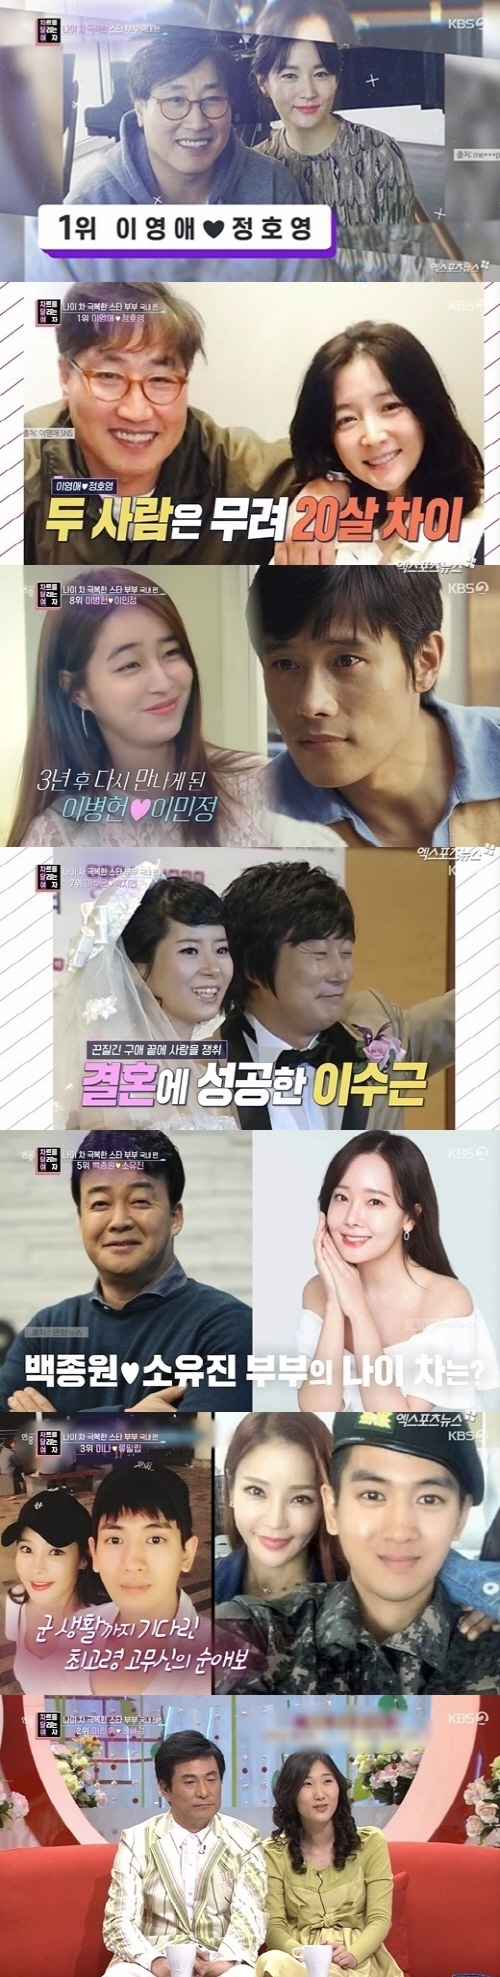 On the 13th, KBS 2TV Year-round live charting the womens corner overcame the age difference and dealt with the star couple who had a marriage.Eighth is Lee Min-jung Lee Byung-hun, a nine-year-old couple who marriages in 2013; Lee Byung-hun is 52 and Lee Min-jung is 40.They are the same age couple who overcame the age difference of 12.Lee Byung-hun met in 2016 with an acquaintance introduction and developed into a lover, but suffered a breakup because of his different situation.Three years later, the two met again and jumped over the age difference and marriage.Lee Min-jung said that the person who picks the bottle cap with a spoon in the entertainment is his ideal type, My husband picked it with his teeth.Lee Byung-hun considered code the most important thing in love; Lee Min-jung was also well known as a humorous entertainer.Seventh is Lee Soo-geun Bakjiyeon, a married couple in 2008.Bakjiyeon is said to have been a stylist of Park Jun-hyung, followed by Lee Soo-geun for six months; Lee Soo-geun did not give up even if Mr. Bakjiyeon refused.Tears in the situation of separation were said to have touched Bakjiyeons heart on Lee Soo-geun; Bakjiyeon was against the kindness during the marriage ceremony.I should say it is an age, he said.Mr Bakjiyeon has come to a crisis where he has a kidney transplant while pregnant with his second fetus.Lee Soo-geun went to the disease with his wife, but came too late and was told that the mothers kidney had already been broken; he is still dialysis.Lee Soo-geun flagged Bakjiyeons health with a birthday cow.The sixth place is Yoo Hyun-sang, Choi Yoon-hee, a swimmer and the sister of the sports team One. The ages were 24 and 37.Yoon Hyun-sang met Choi Yoon-hees parents on a date, but they did not even look at him. The two men raised a secret marriage ceremony in 1991,When his eldest son was born, his father-in-laws mother-in-law was angry.The fifth place is Baekjong, which is 56 years old this year and So Yoo-jin is 41 years old.Sooo-jins parents also said they were 30 years old and envied their usual age difference.So Yoo-jin said in the entertainment, I hated it because I had a lot of age difference, but I met a few times and Baekjong One was humorous (I liked it).) I talk every day now.Fourth place is Seo Taiji Lee Eun-sung; in 2008 Lee Eun-sung appeared in the Seo Taiji music video and developed into a lover.In 2013, he announced marriage: 16 years old. He was a fan of Seo Taiji in The Rounding; he is said to sometimes feel the generation gap.Seo Taiji told the entertainment that I dont care if I was such a star in the old age, I dont care if I talk about old times.At the time of the childrens debut with Seo Taiji, Lee Eun-sung was five years old; the two have a daughter.The third place is Mina Liuth, a young couple who is seventeen years old and seventeen years old.The first time she saw Mina, she was in love with her first-time mother-in-law, who was nine years old.I cried for a while. Minas mother was upset that she was only guilty of loving a young person.It was met with opposition from both families, but it had a happy ending.Philip Roth said, I will love you even if I am born in my next life. Mina expressed affection, saying, It is the most wonderful in my eyes.Lee Han-wi said, There is no generation difference. You have to do well. She has two sons and two daughters and lives happily.The top picks are Lee Yeong-ae and Jeong Ho-young.Lee Yeong-ae had a quiet marriage ceremony and a highly secret marriage ceremony in Hawaii in 2009.Lee Yeong-ae has said that her husband is trustworthy and sincere, and has a very deep feeling with feelings beyond love.In one broadcast, she revealed her husband and twin children: Jeong Ho-young, a Korean-American businessman, said Property is two trillion One. The age difference between the two is as much as 20 years.Lee Yeong-ae confessed that there was no fear of marriage and that he had a mental relaxation after marriage.Photo: KBS 2TV broadcast screen